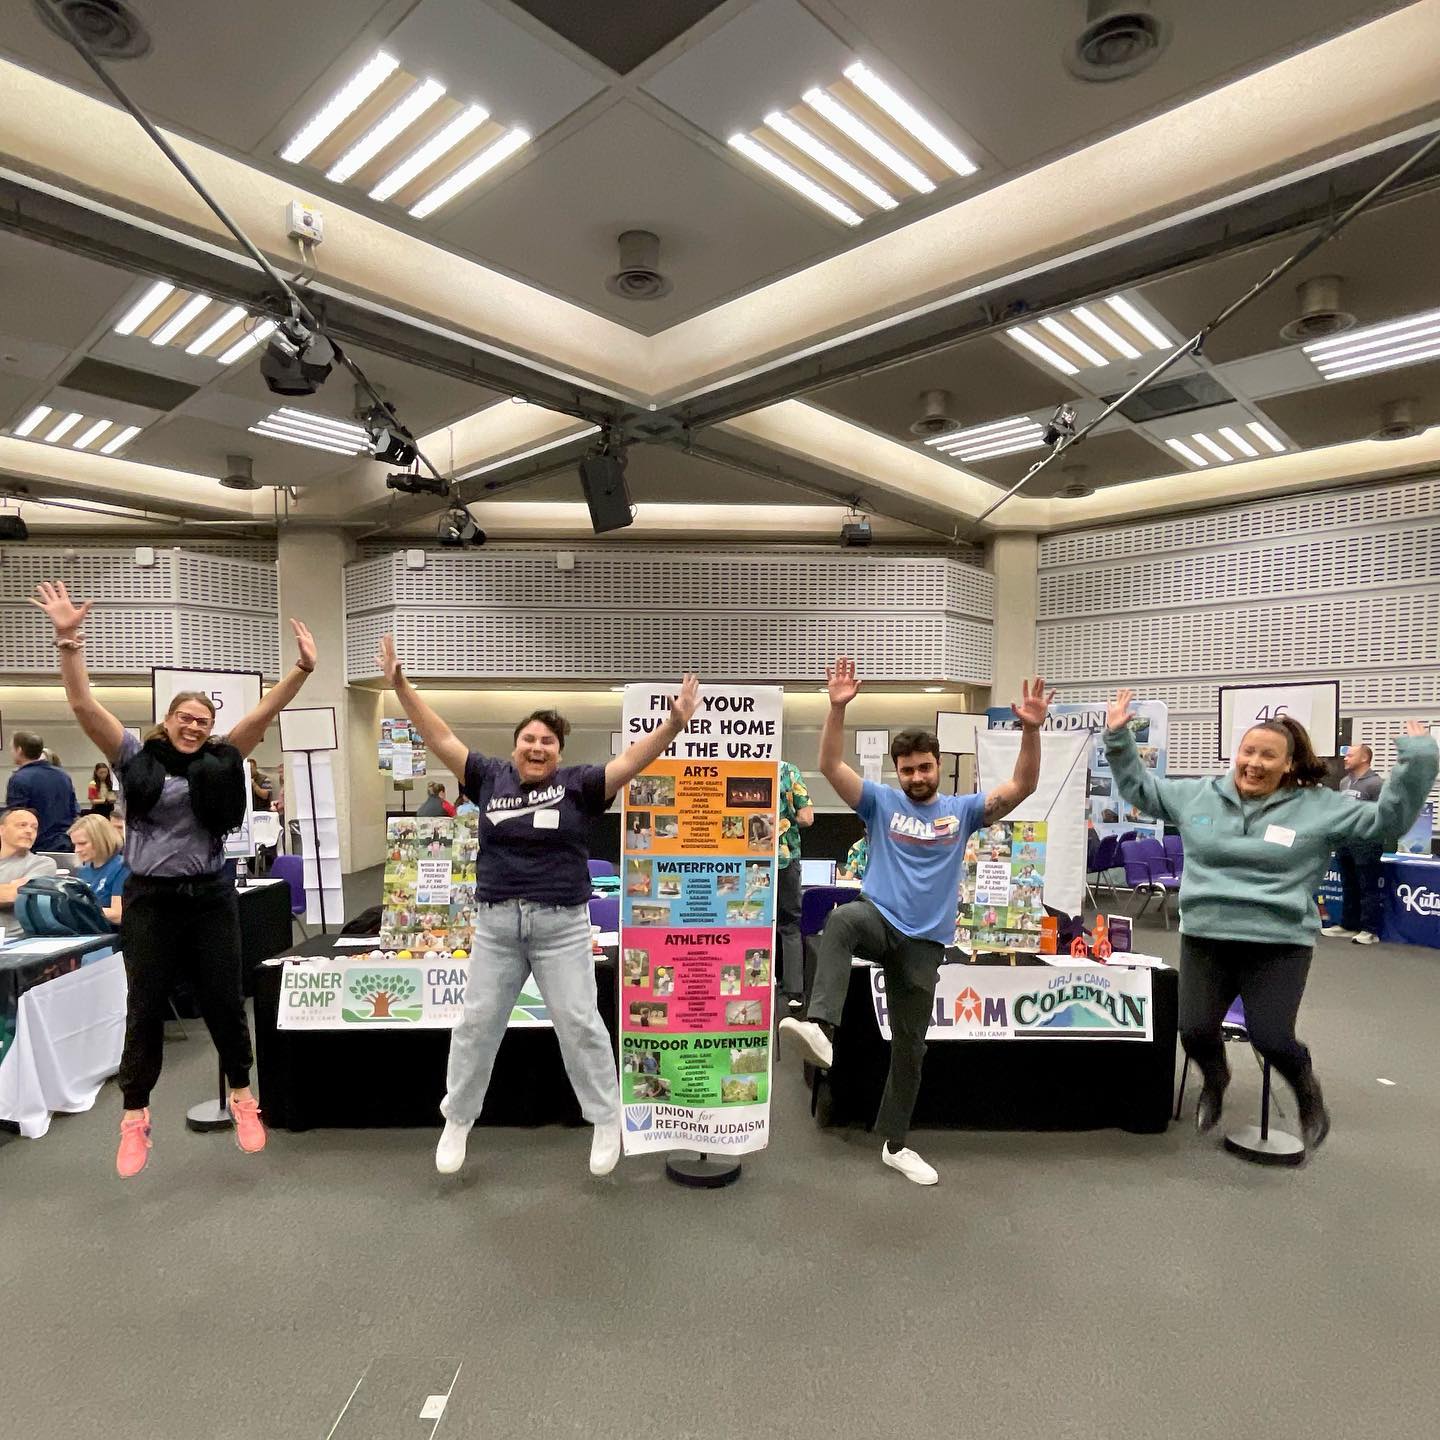 Jumping for joy at the @campamerica69 London Hiring Fair! Check out our story to see some of the awesome staff we hired!